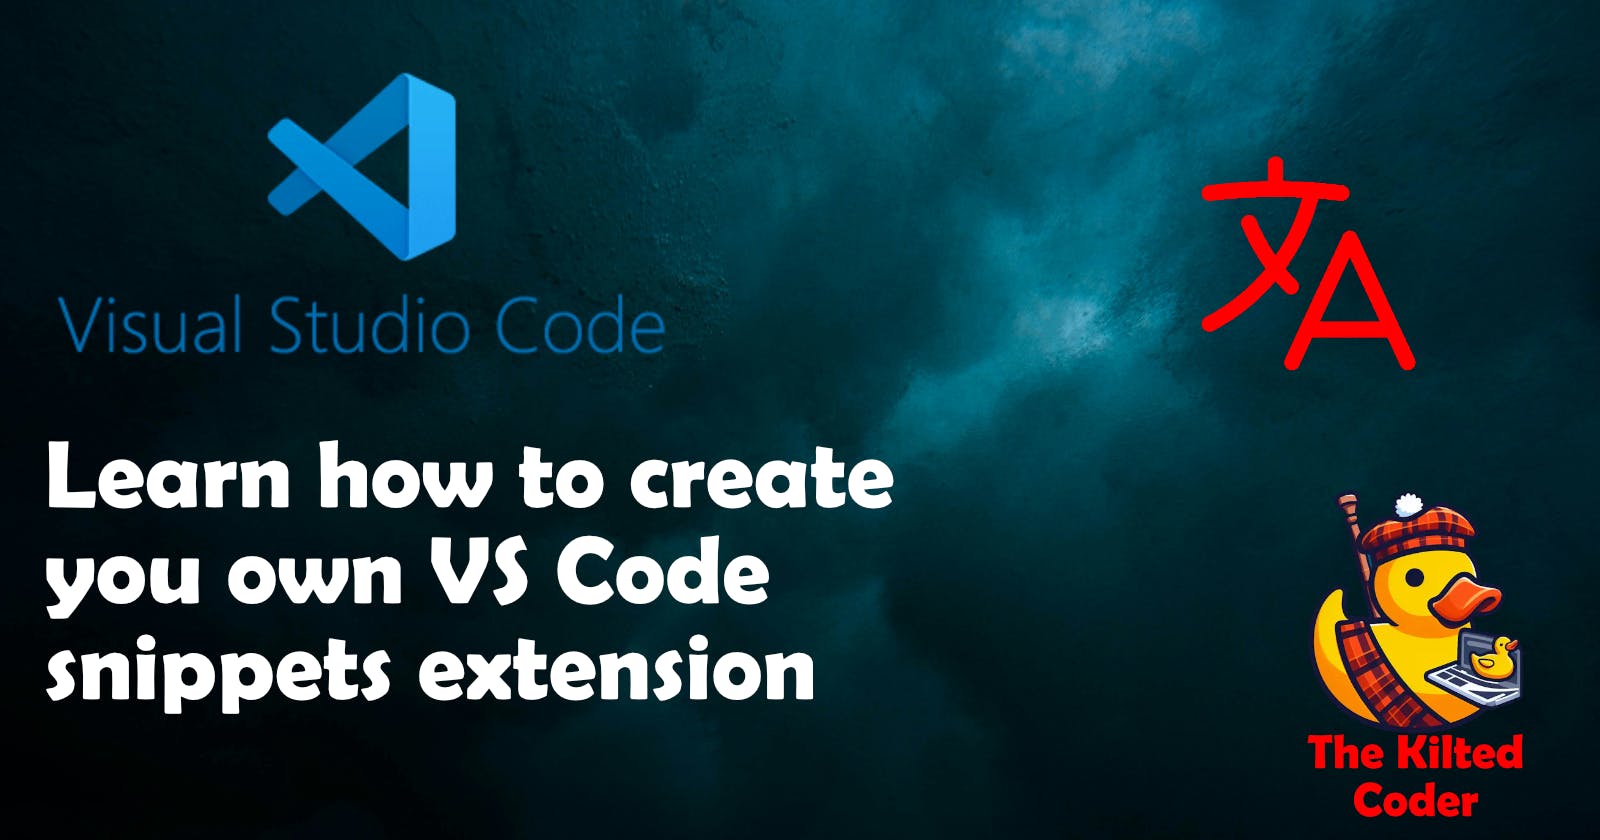 Creating a VS Code snippet extension